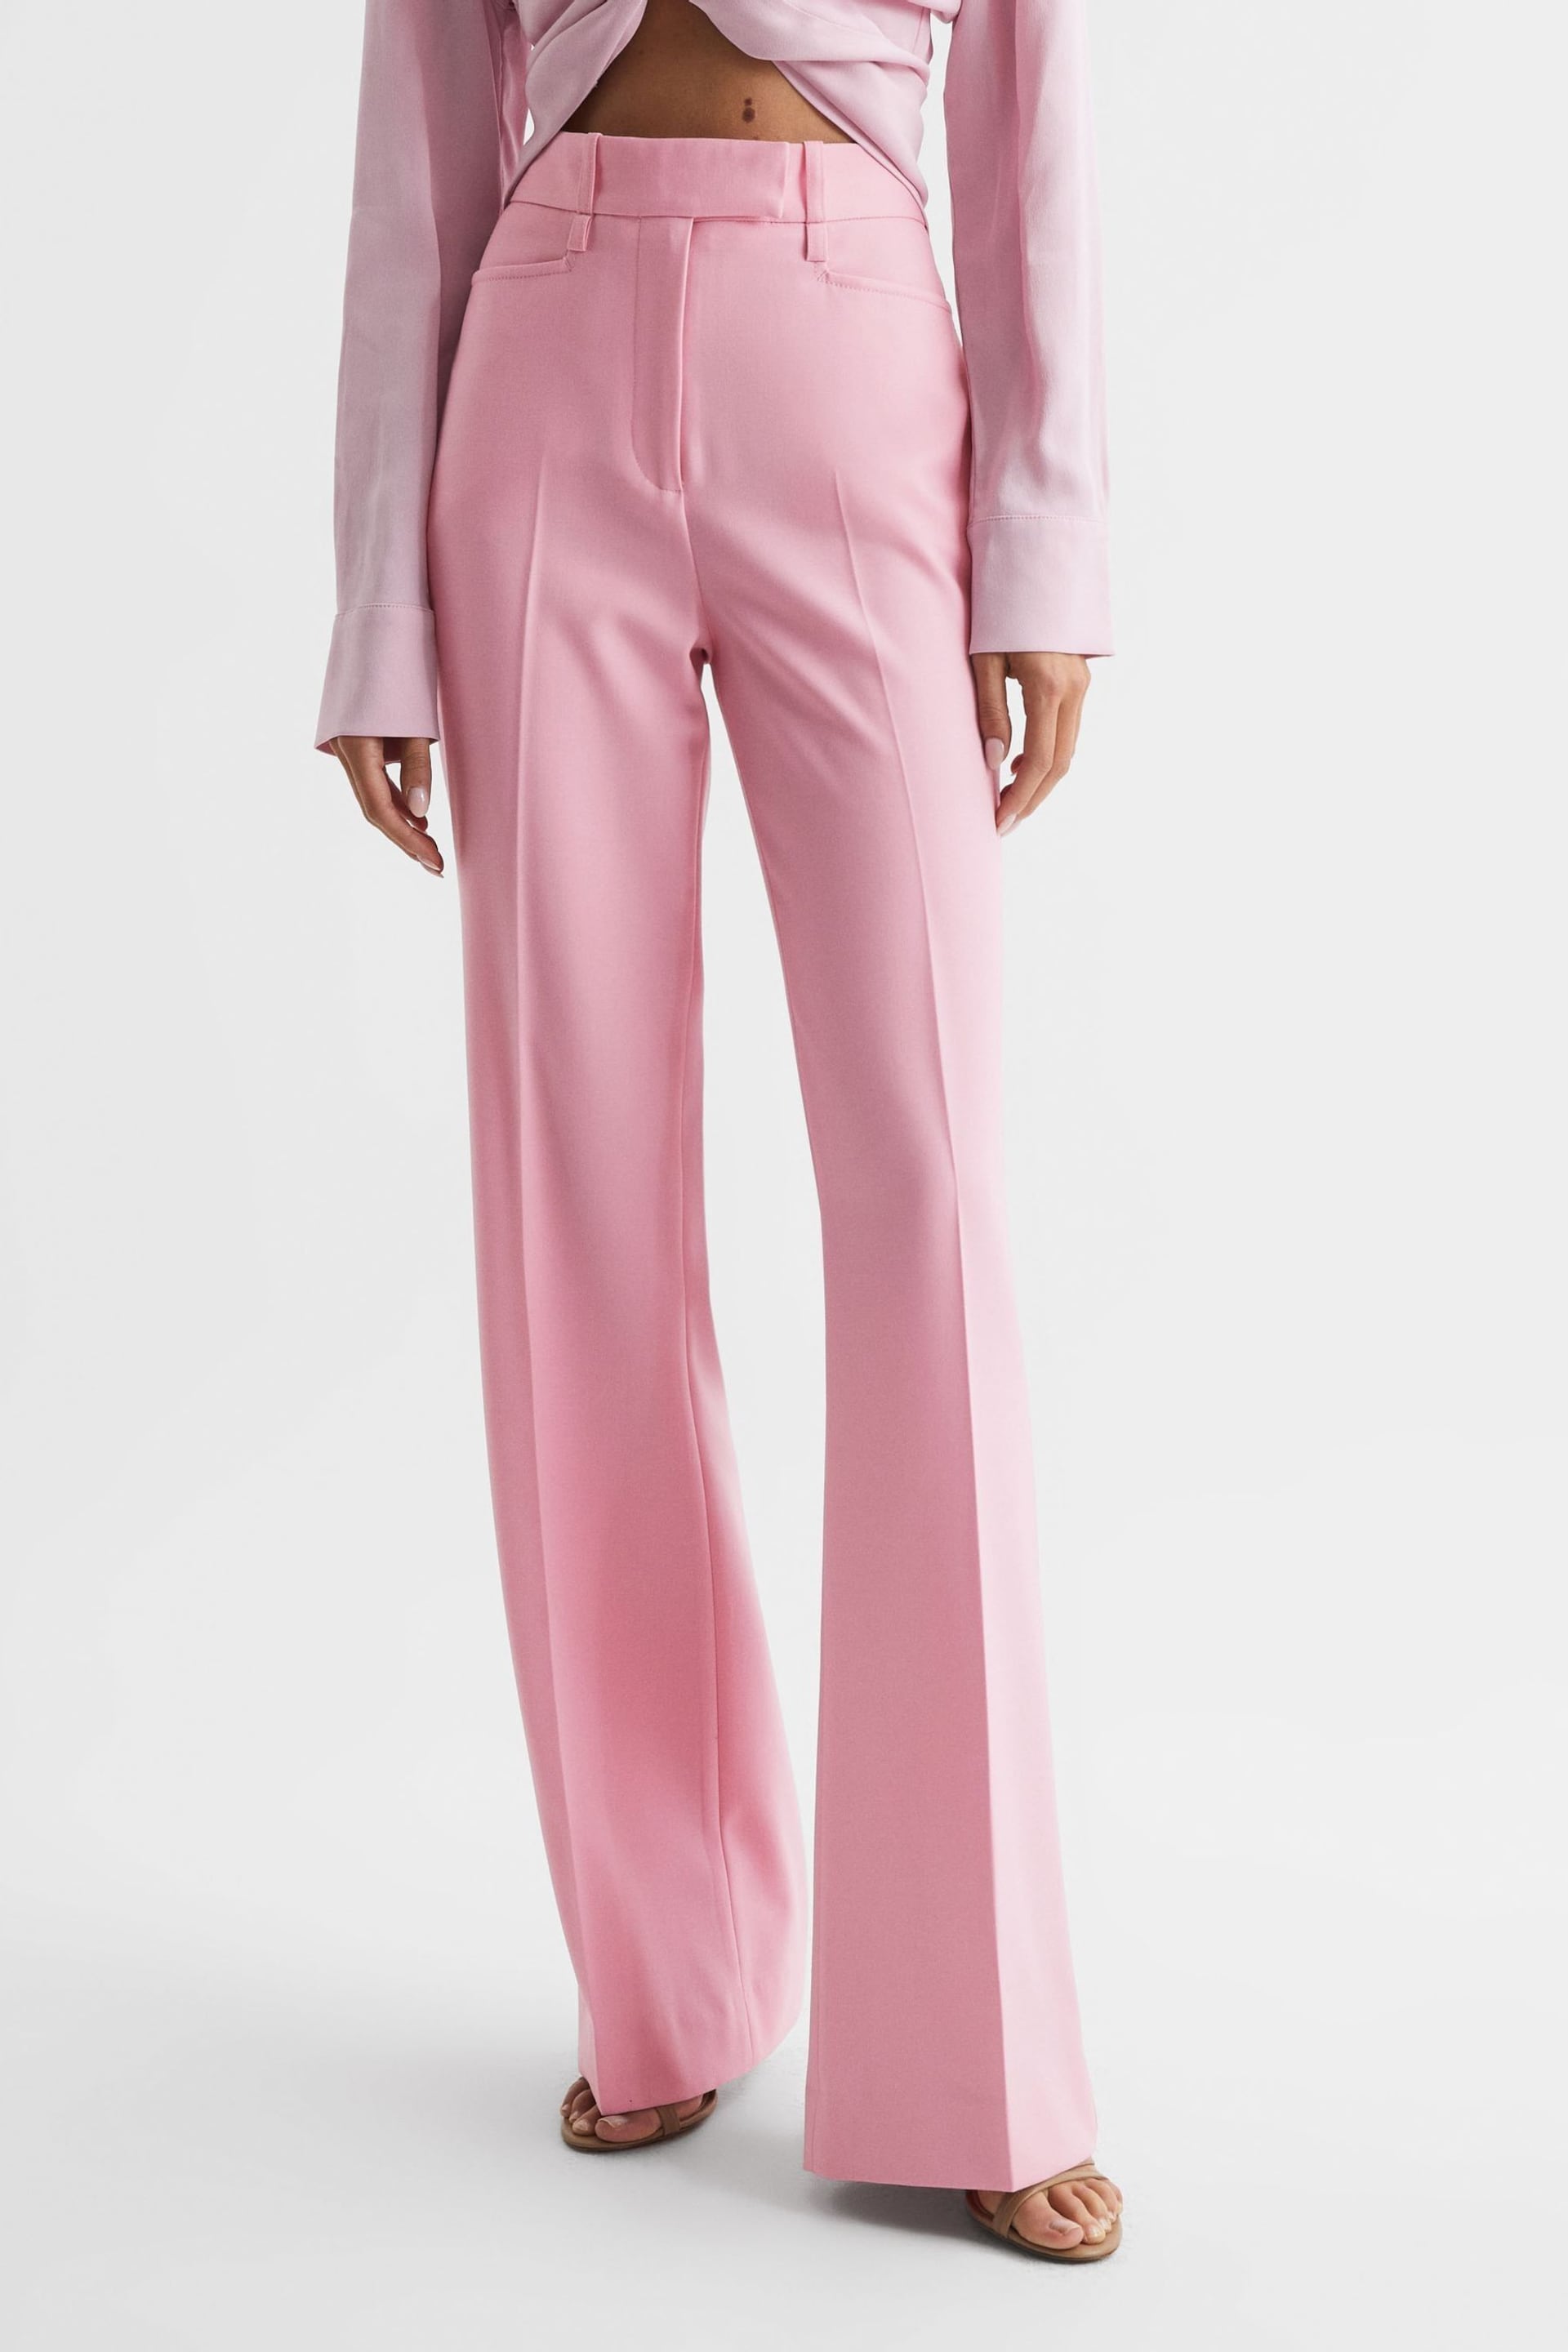 Reiss Pink Blair High Rise Wide Leg Trousers - Image 3 of 8